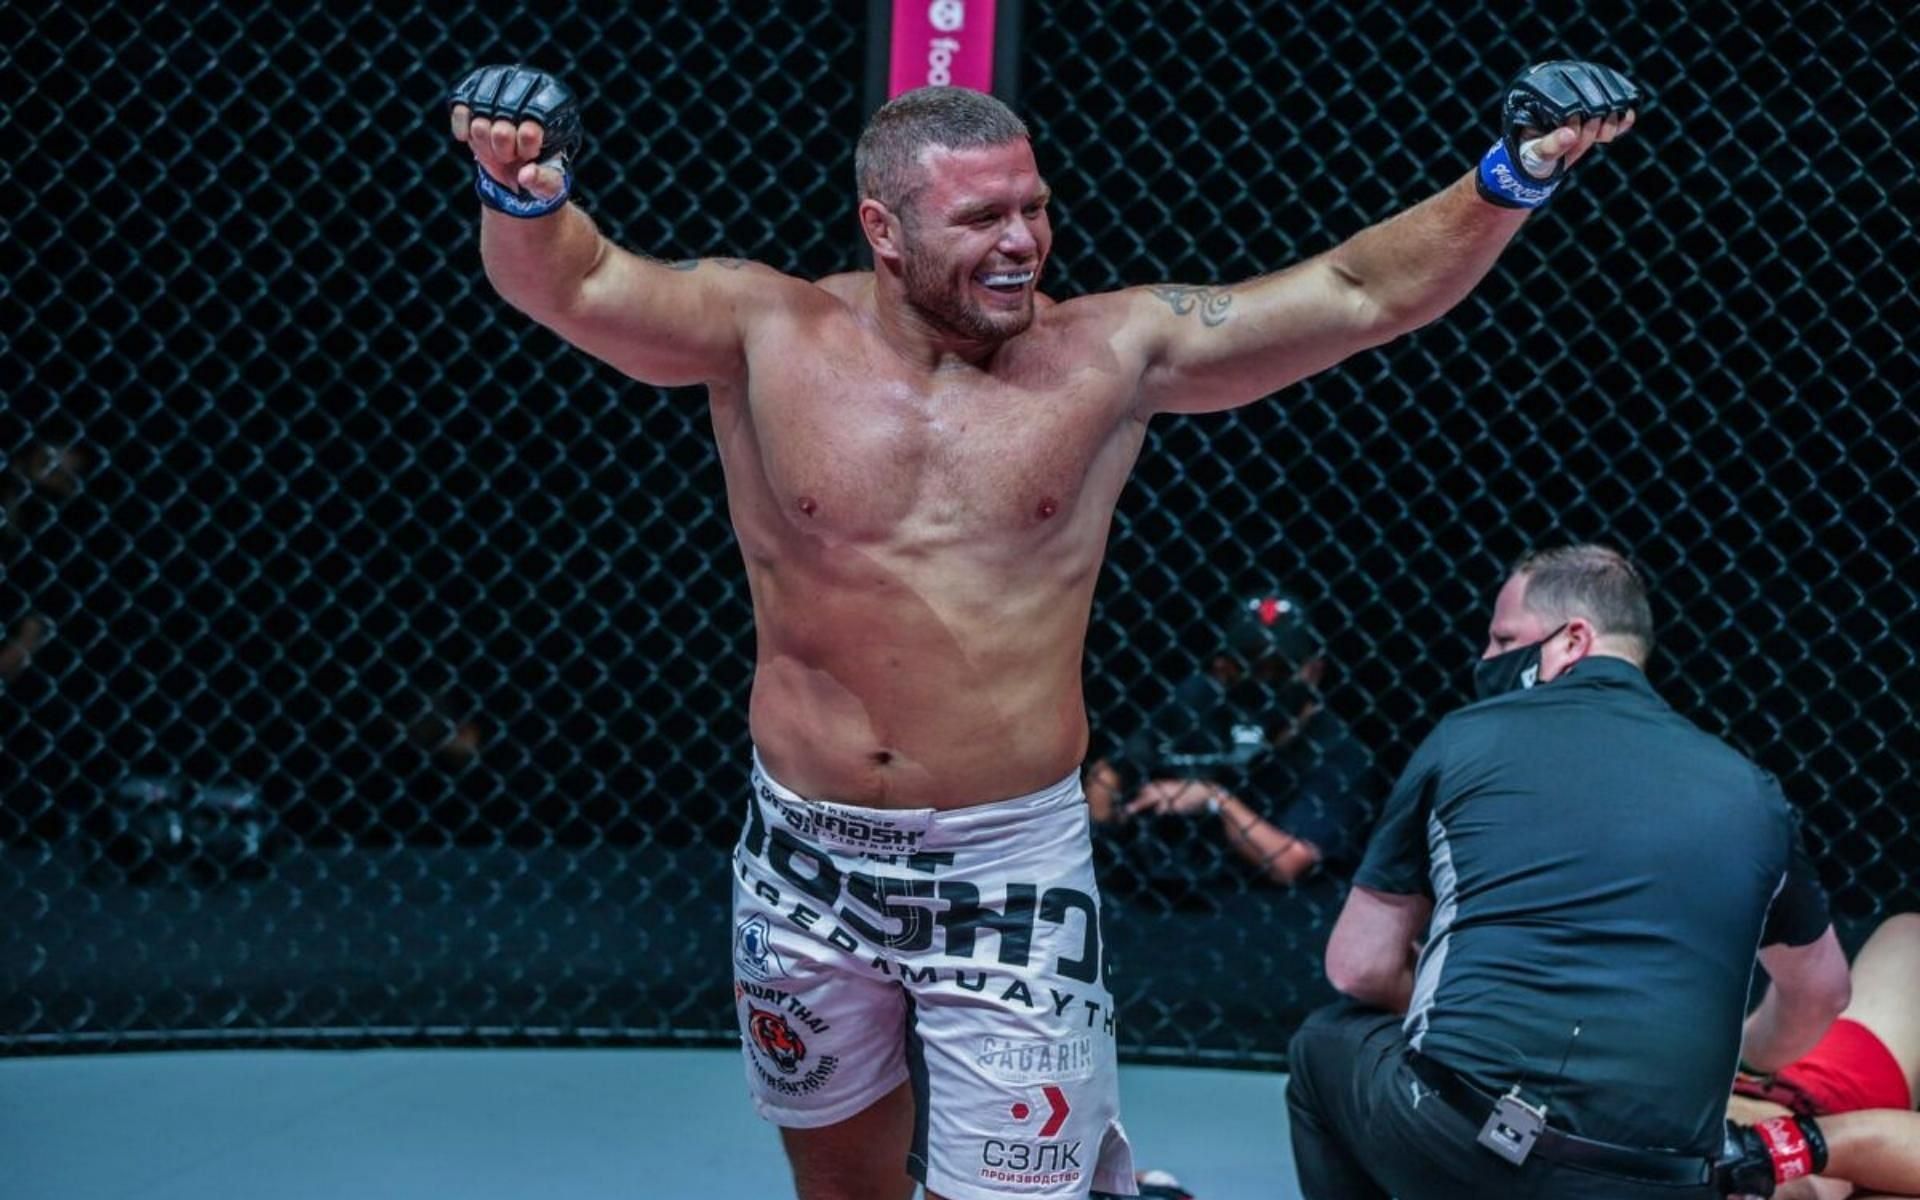 ONE Championship heavyweight Anatoly Malykhin made a memorable ONE debut last year. (Image courtesy of ONE Championship)